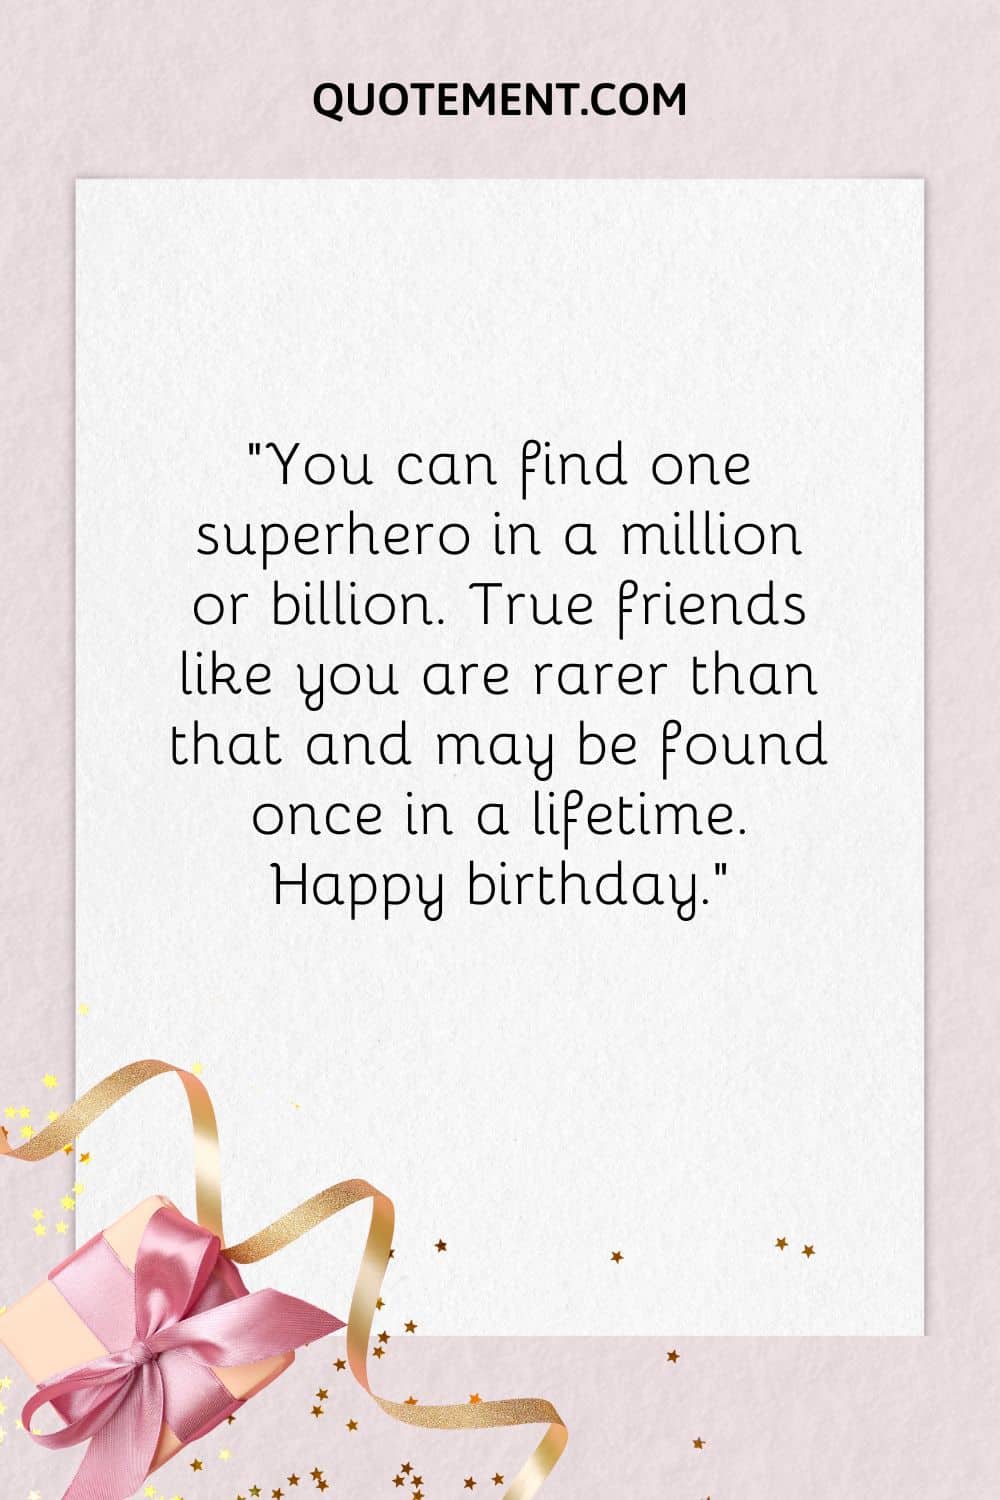 “You can find one superhero in a million or billion. True friends like you are rarer than that and may be found once in a lifetime. Happy birthday.”